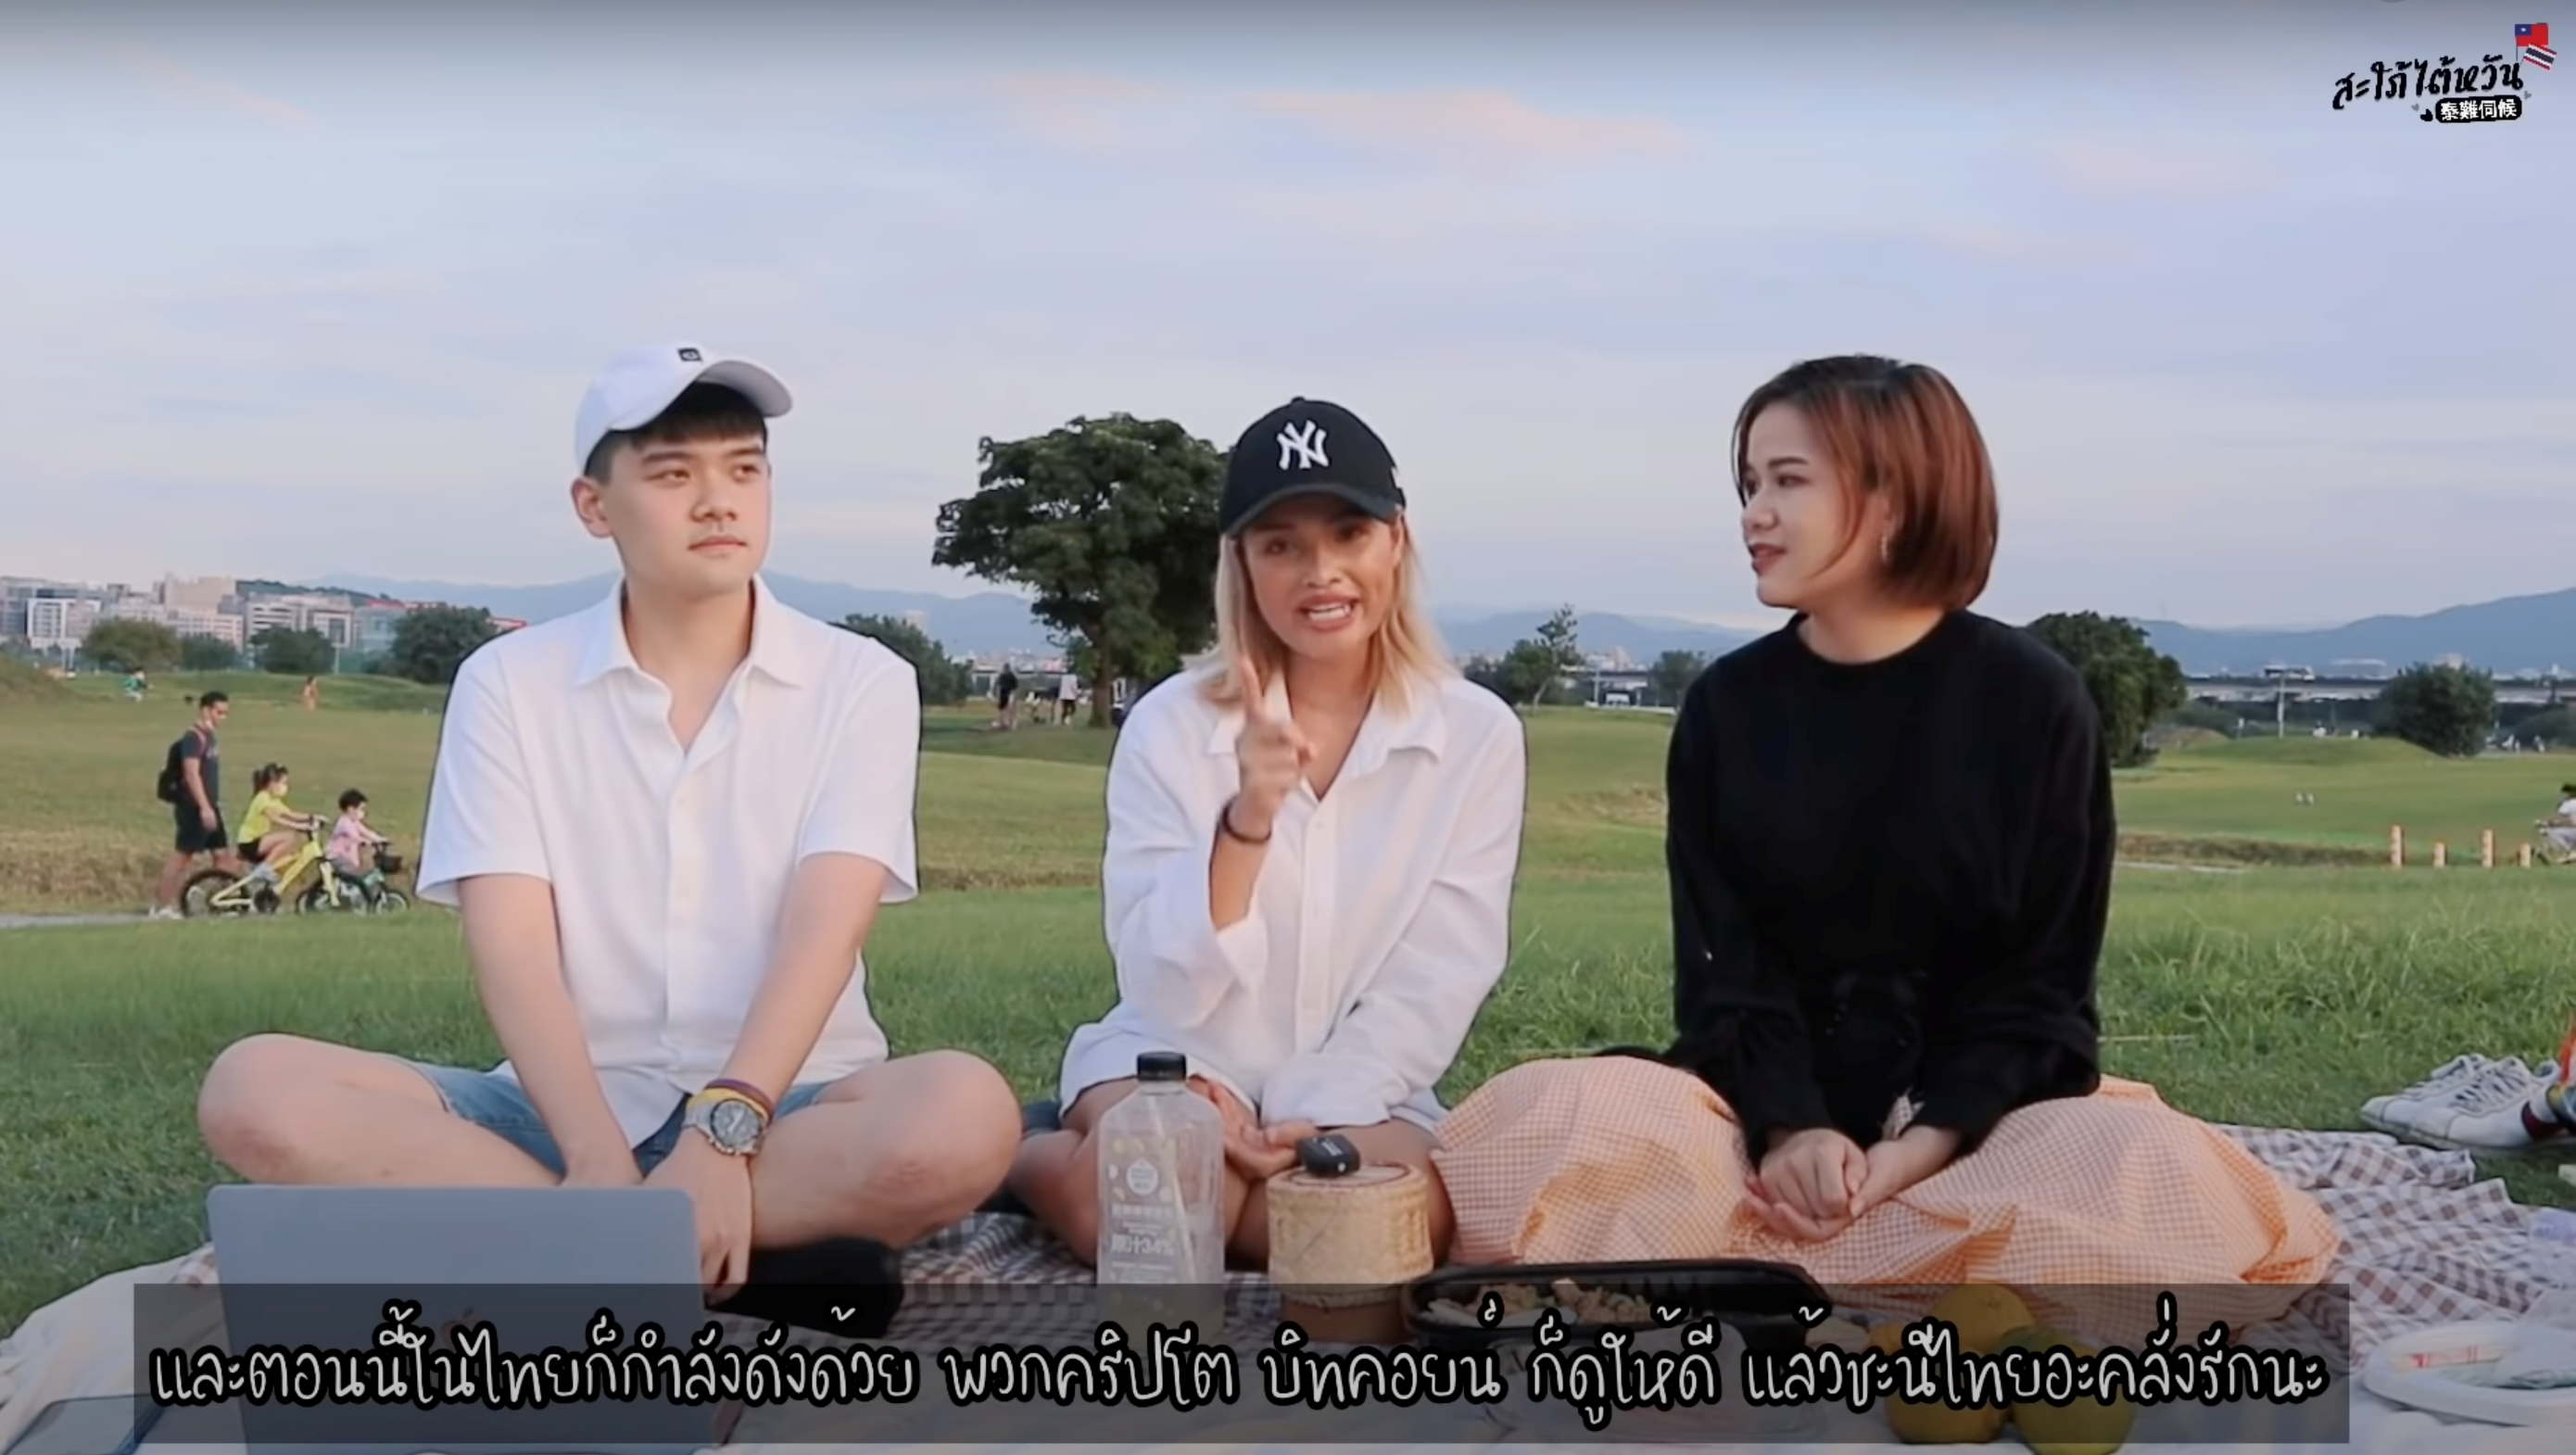 June specially makes a video to remind them that cross-border marriage involves many challenges. (Photo / Provided by the @ Junejustin TV - สะใภ้ไต้หวัน泰難伺候)